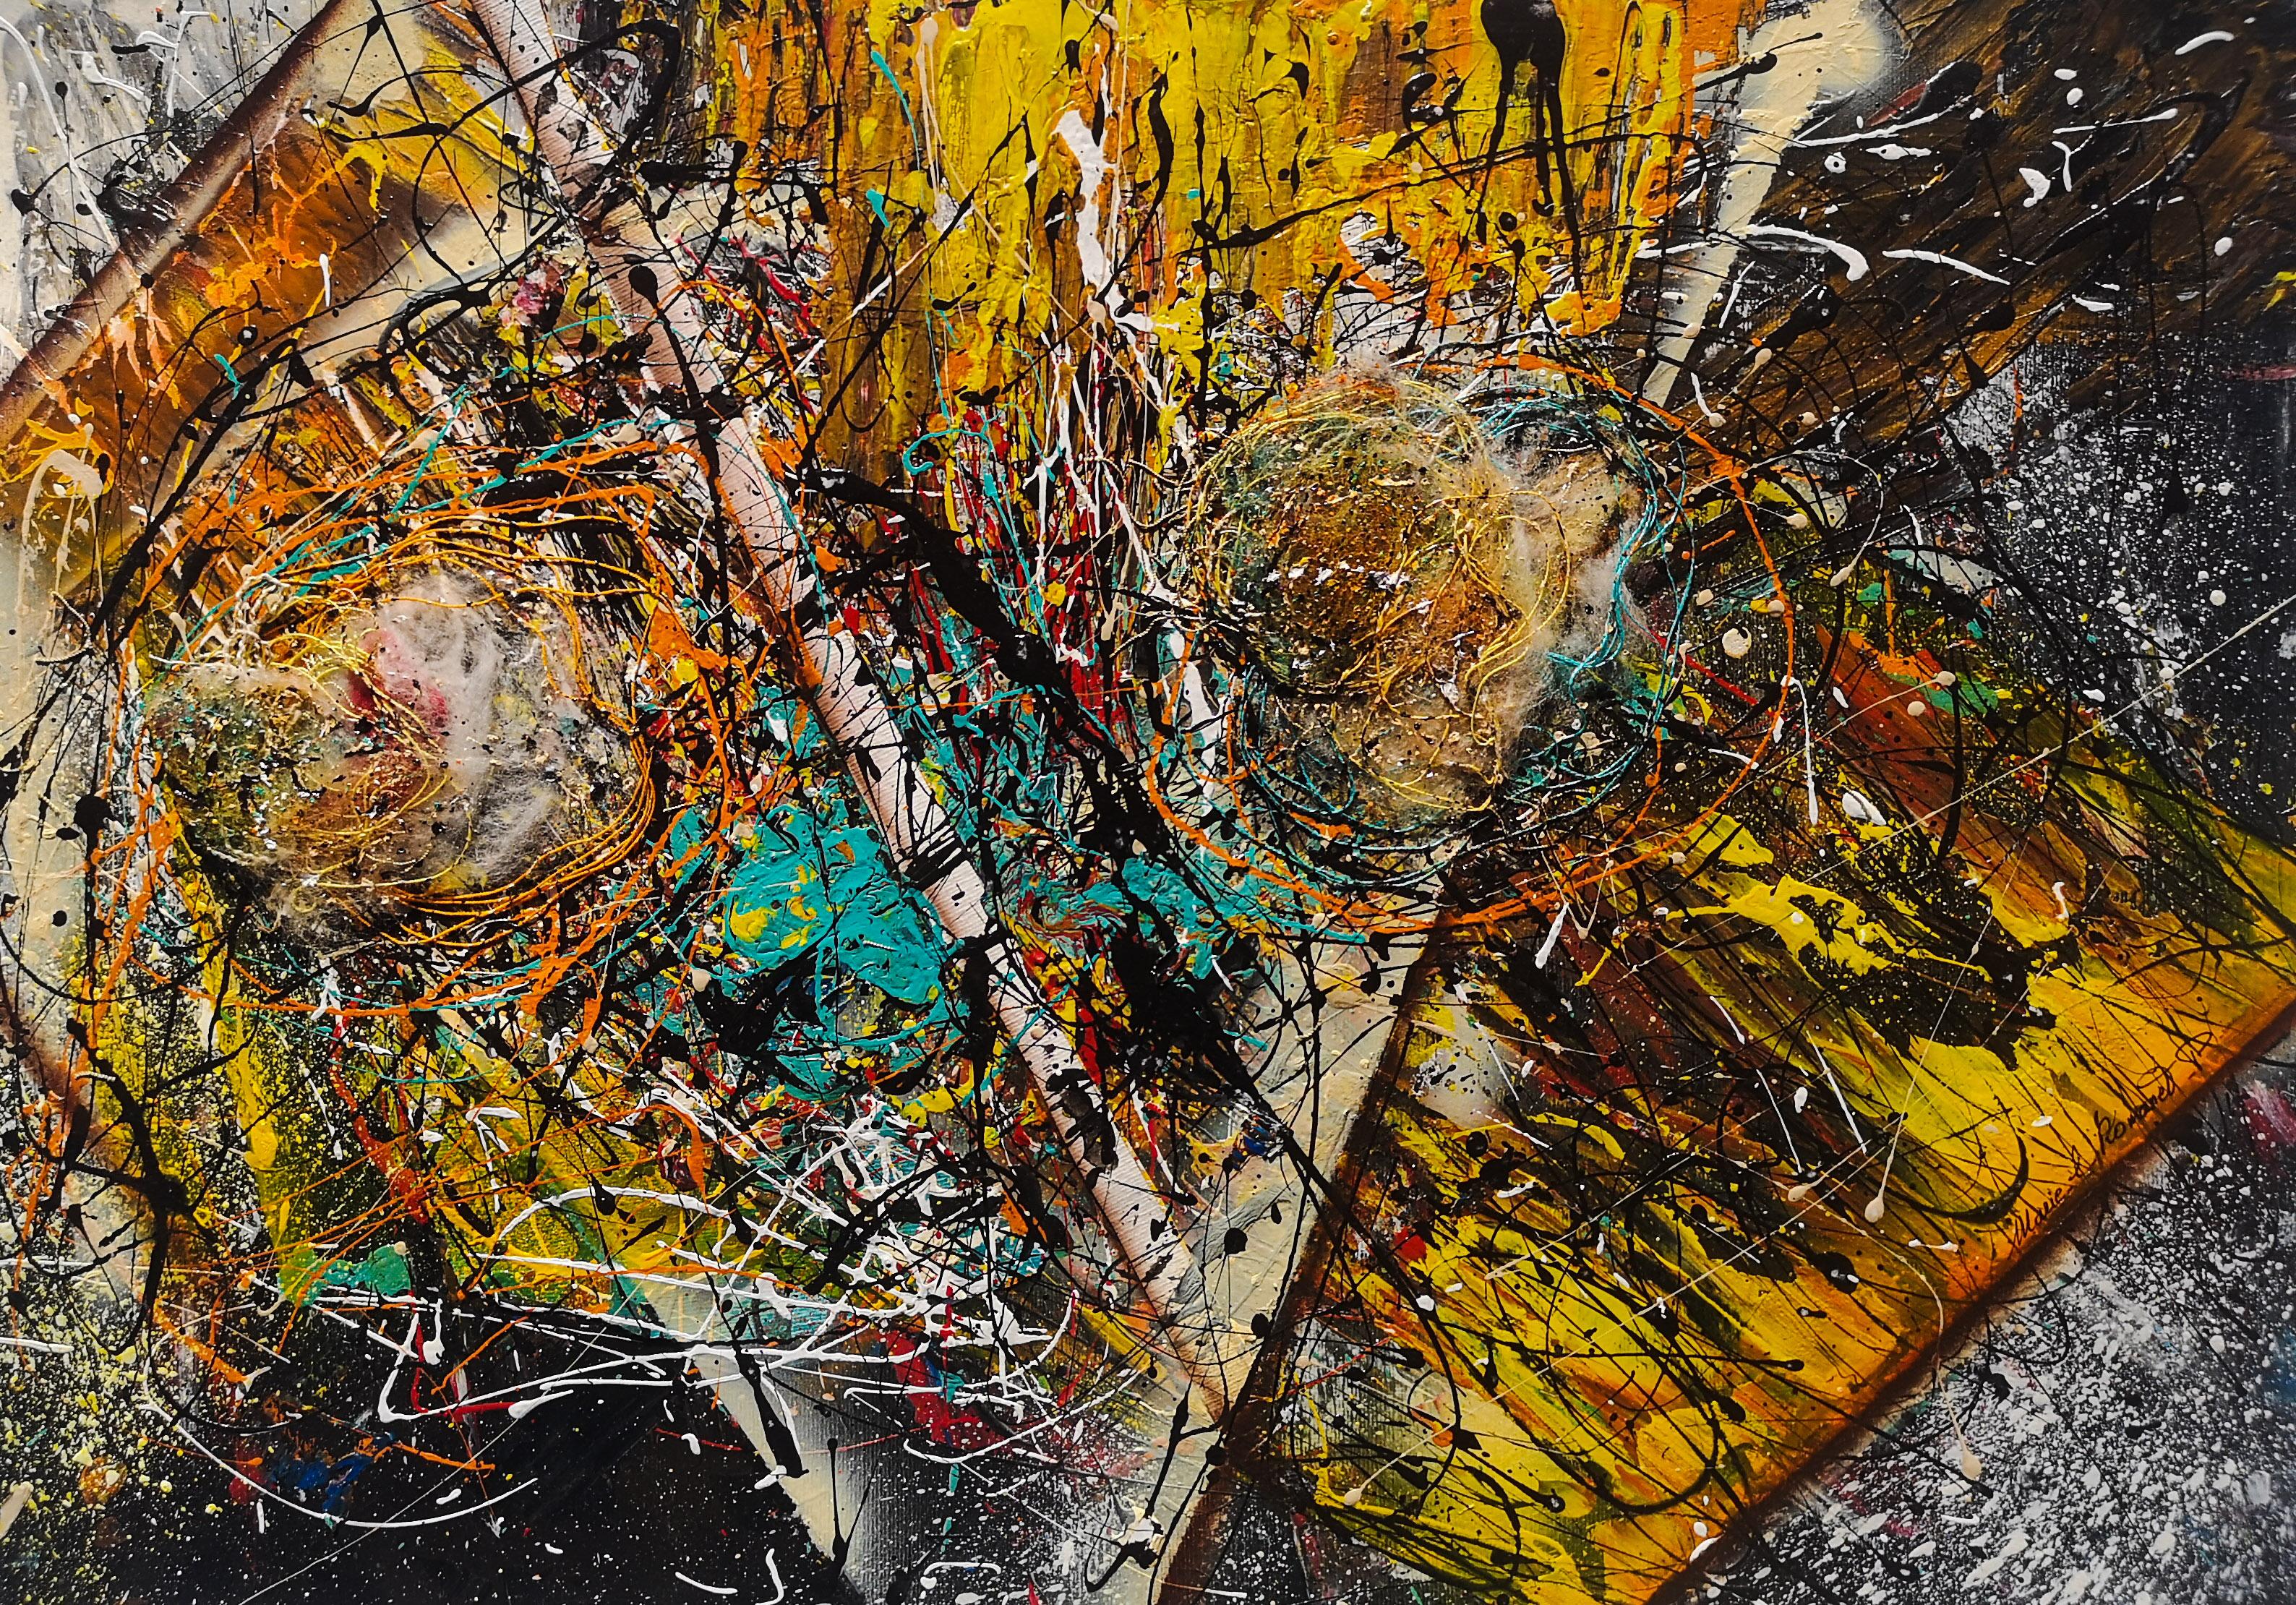 "THE STRUGGLE WE ARE INTODAY IS GIVING US STRENGTH WE NEED ..."  Pollock style